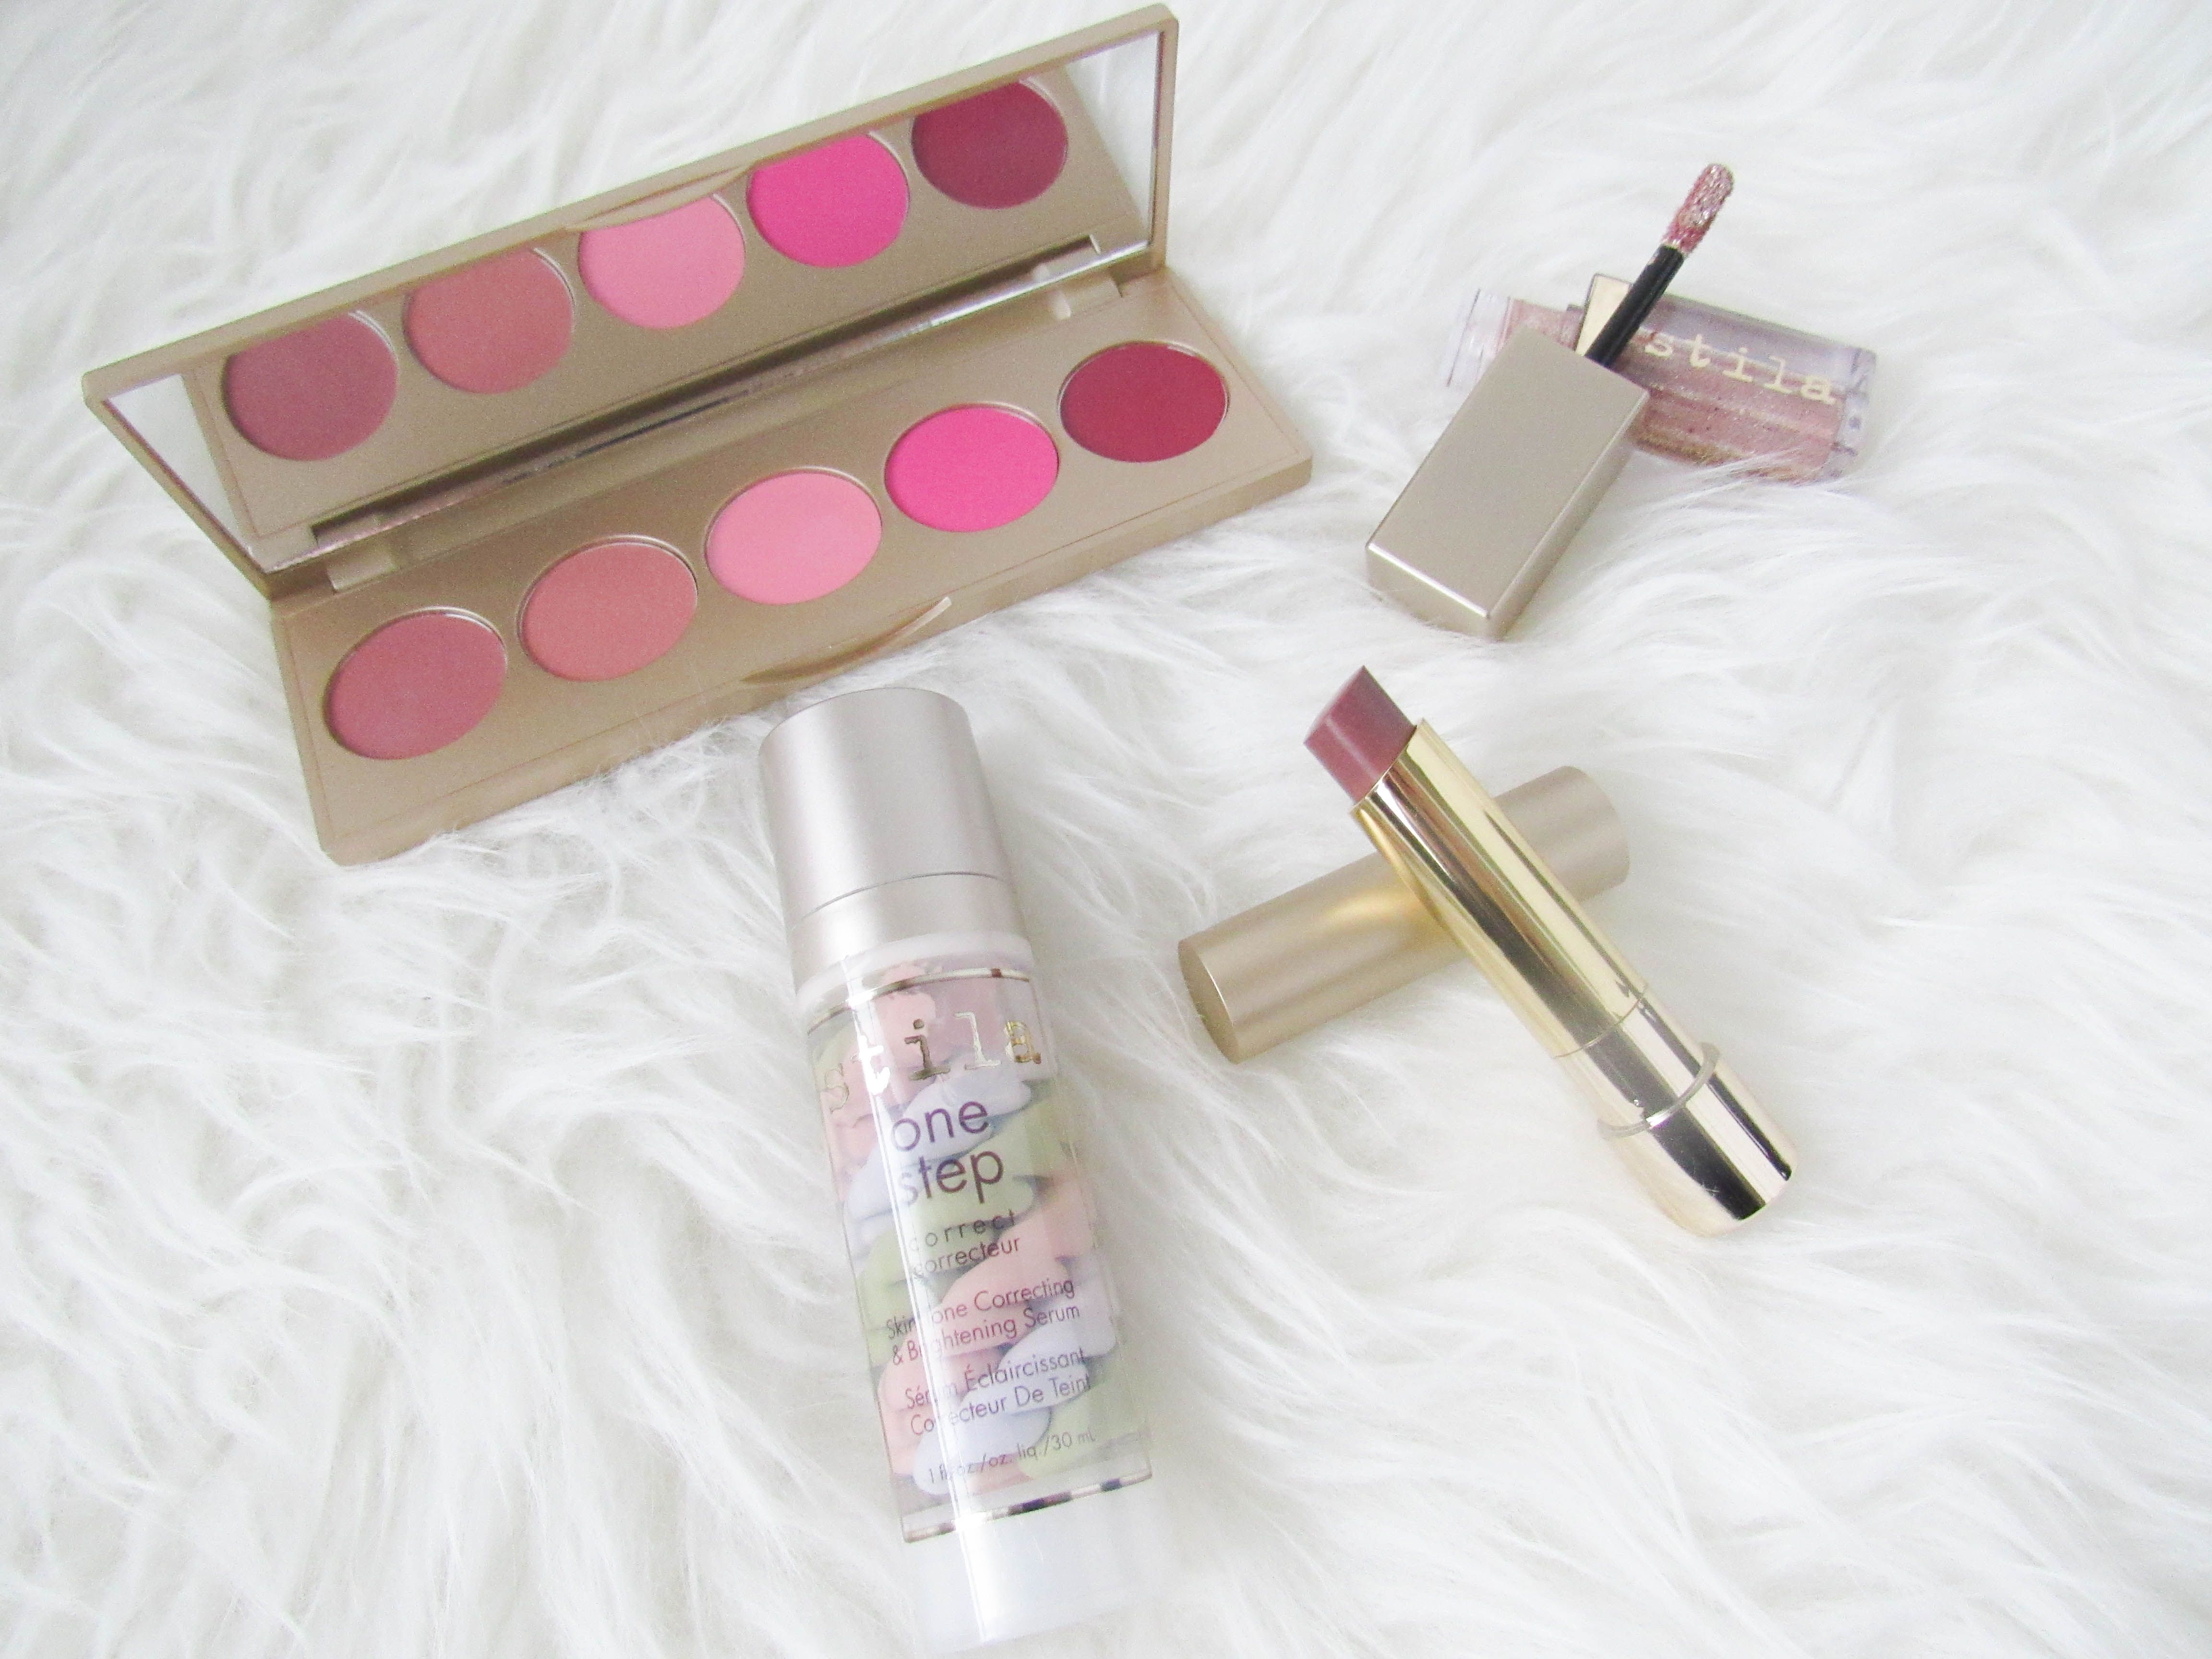 Products I am loving from Stila